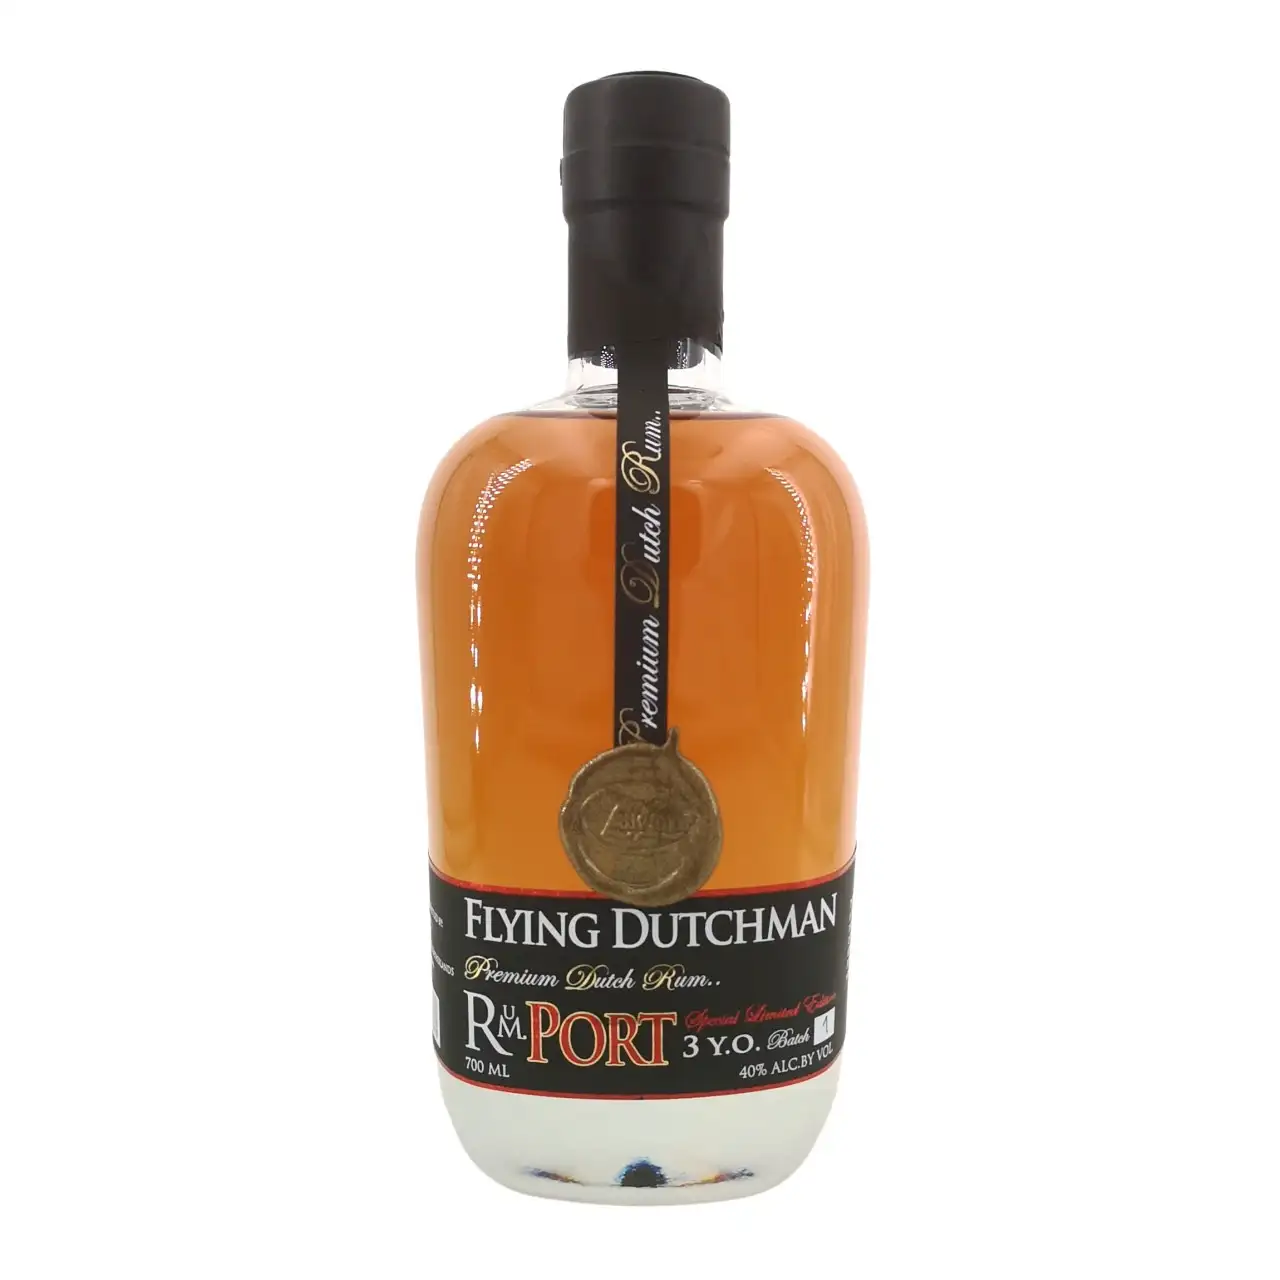 Image of the front of the bottle of the rum Flying Dutchman Rum Port